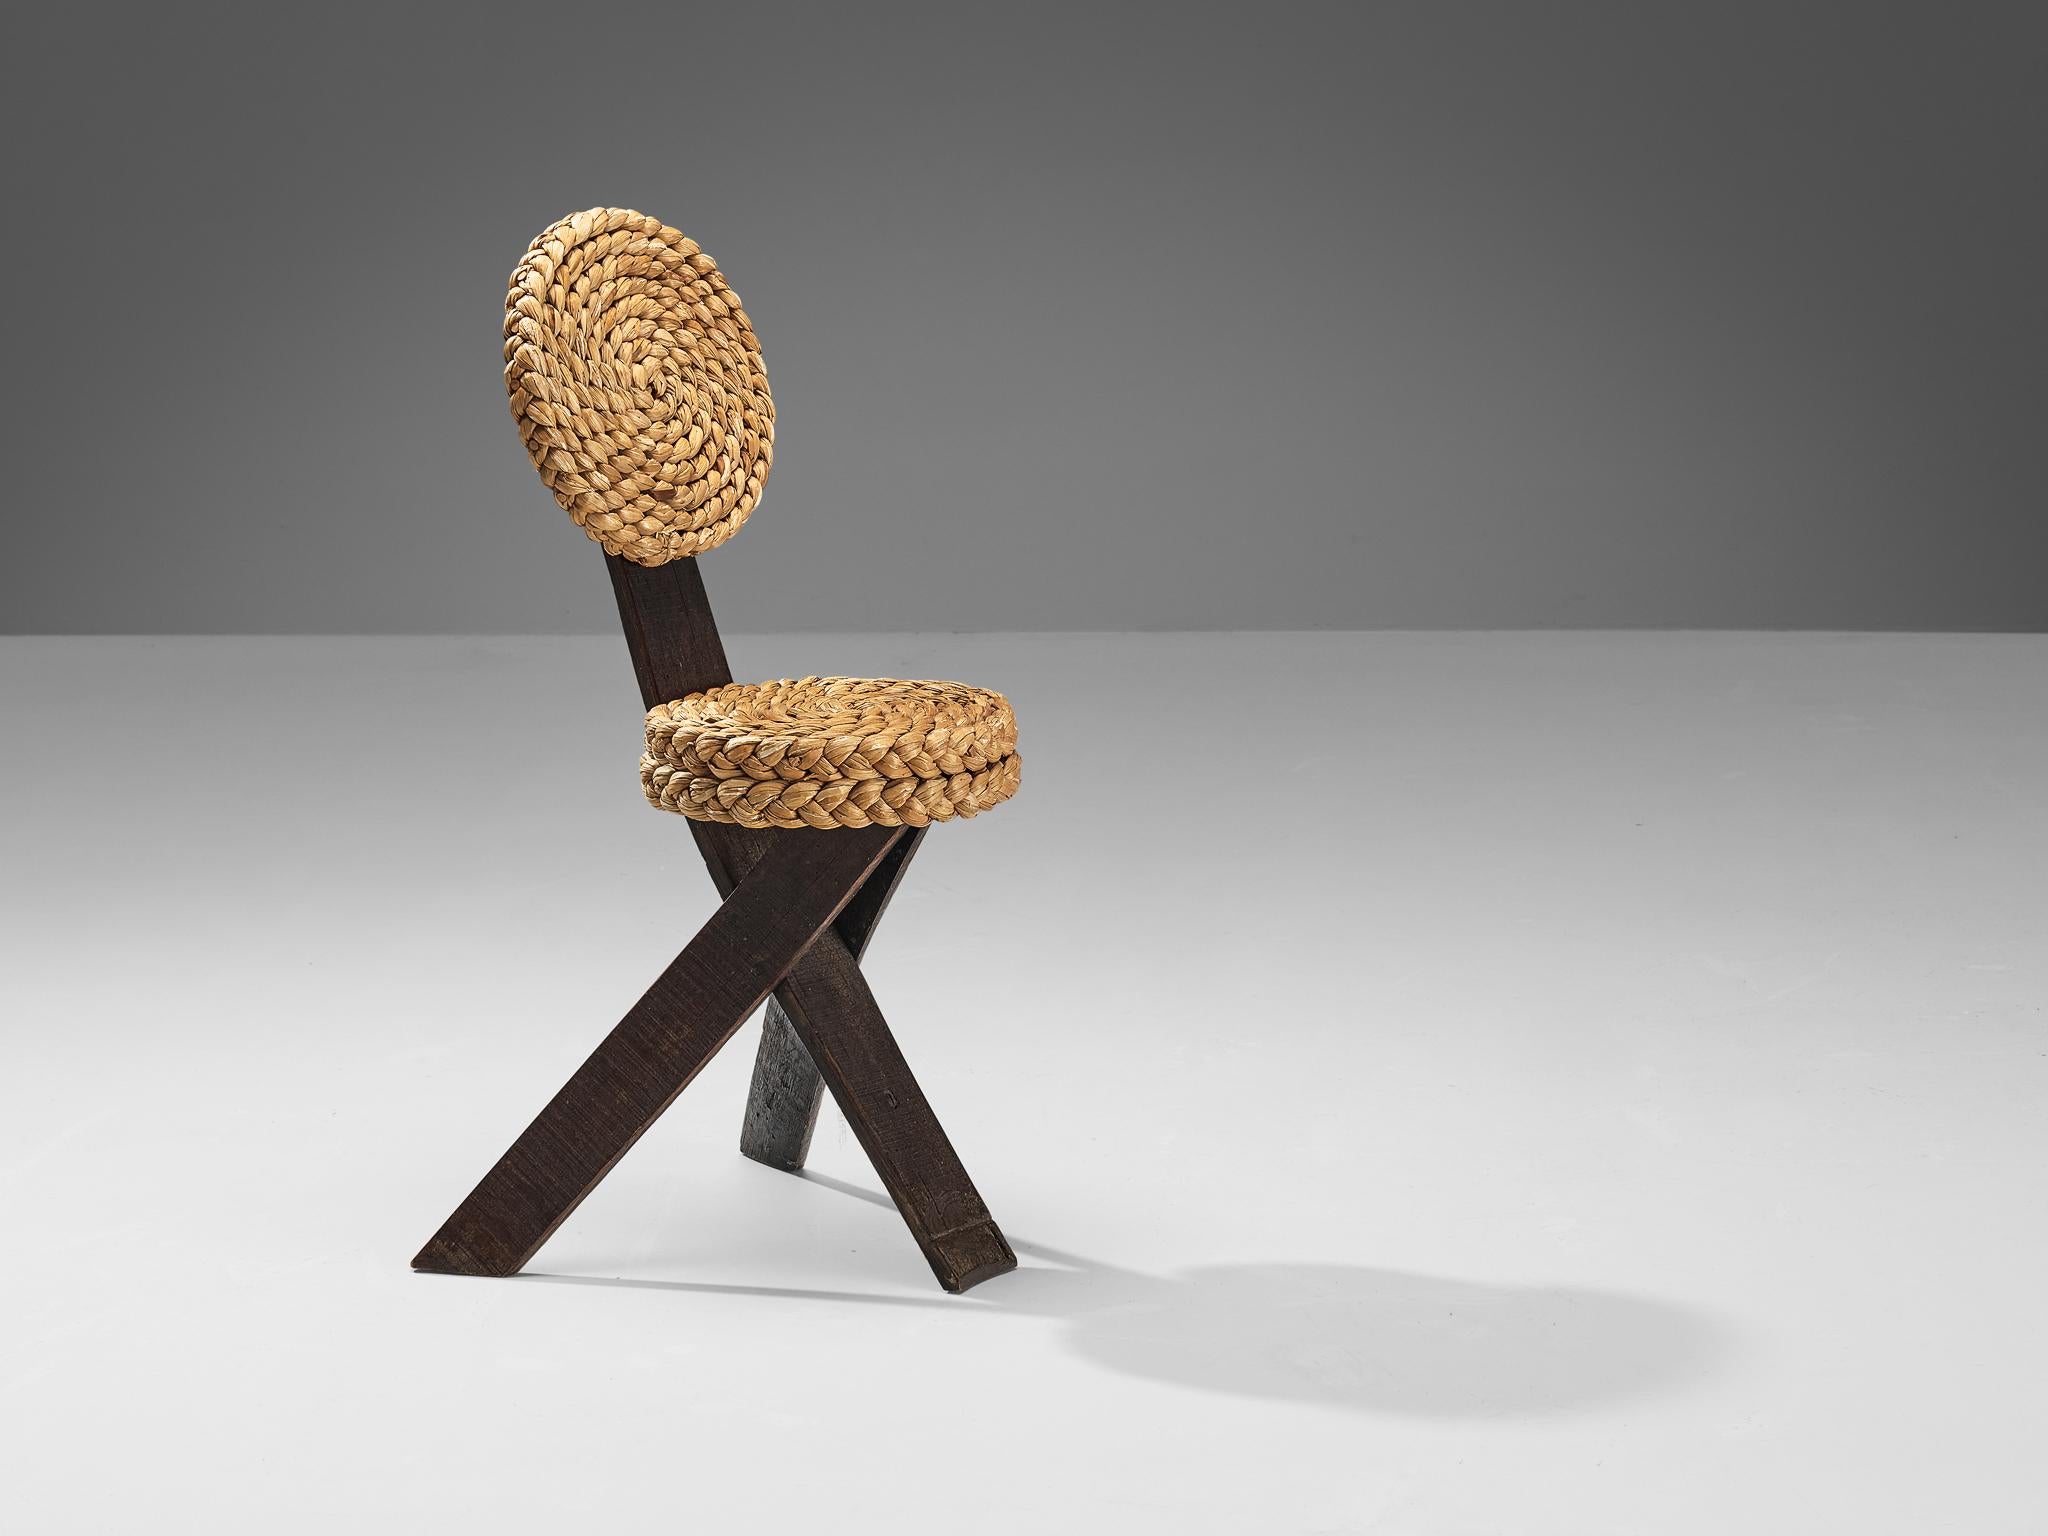 Adrien Audoux and Frida Minet, side chair, oak, straw, iron, France, 1950s

This sculptural side chair was created by the French designer couple Adrien Audoux and Frida Minet. The three flat legs are made of dark oak. One leg runs upwards and ends